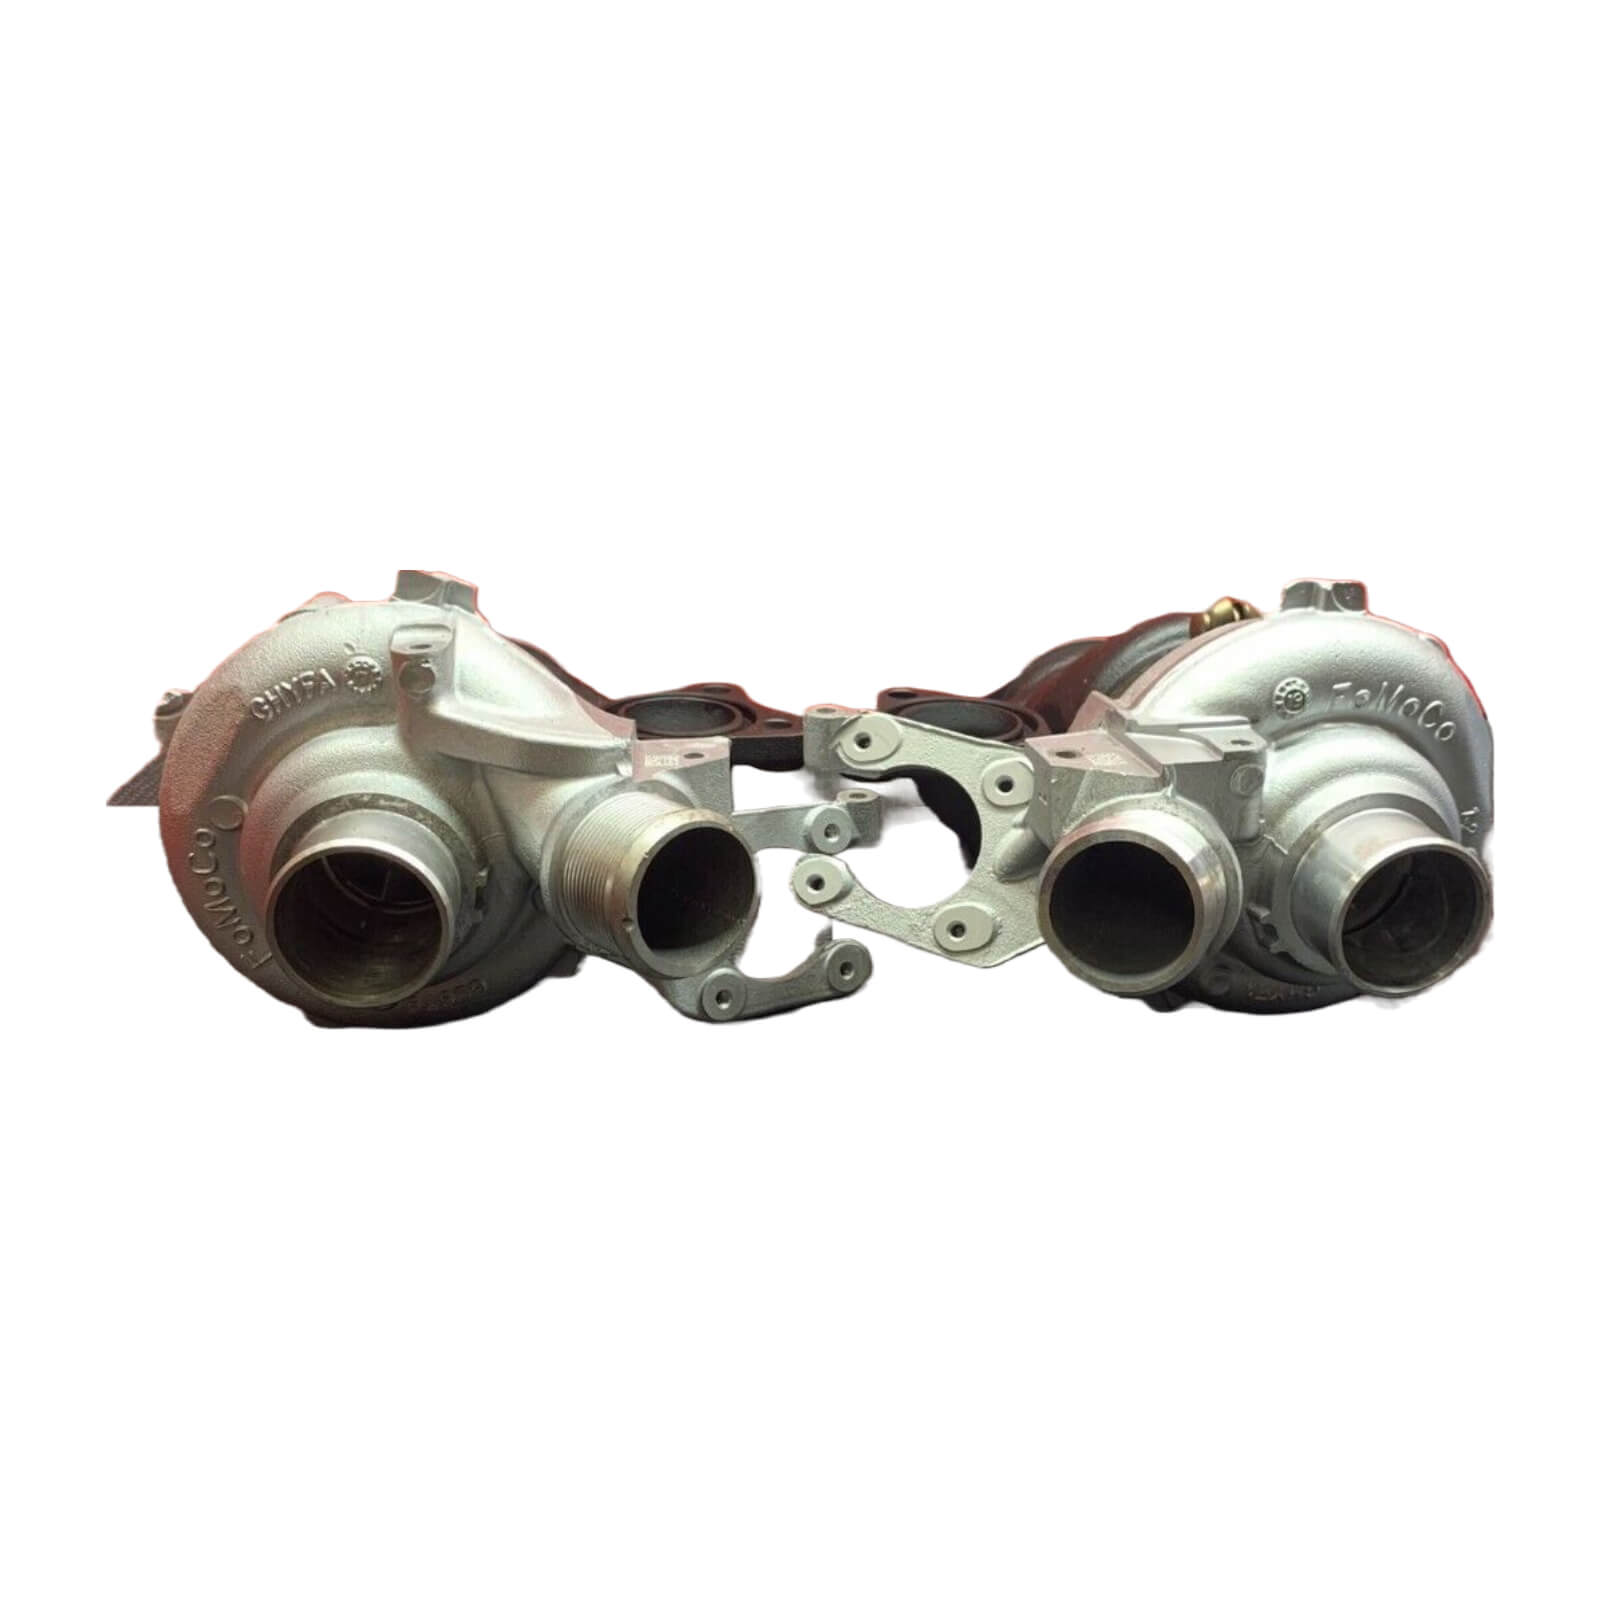 Ford F-150 Raptor Lincoln Navigator 3.5L - Pair of Turbochargers 18-21